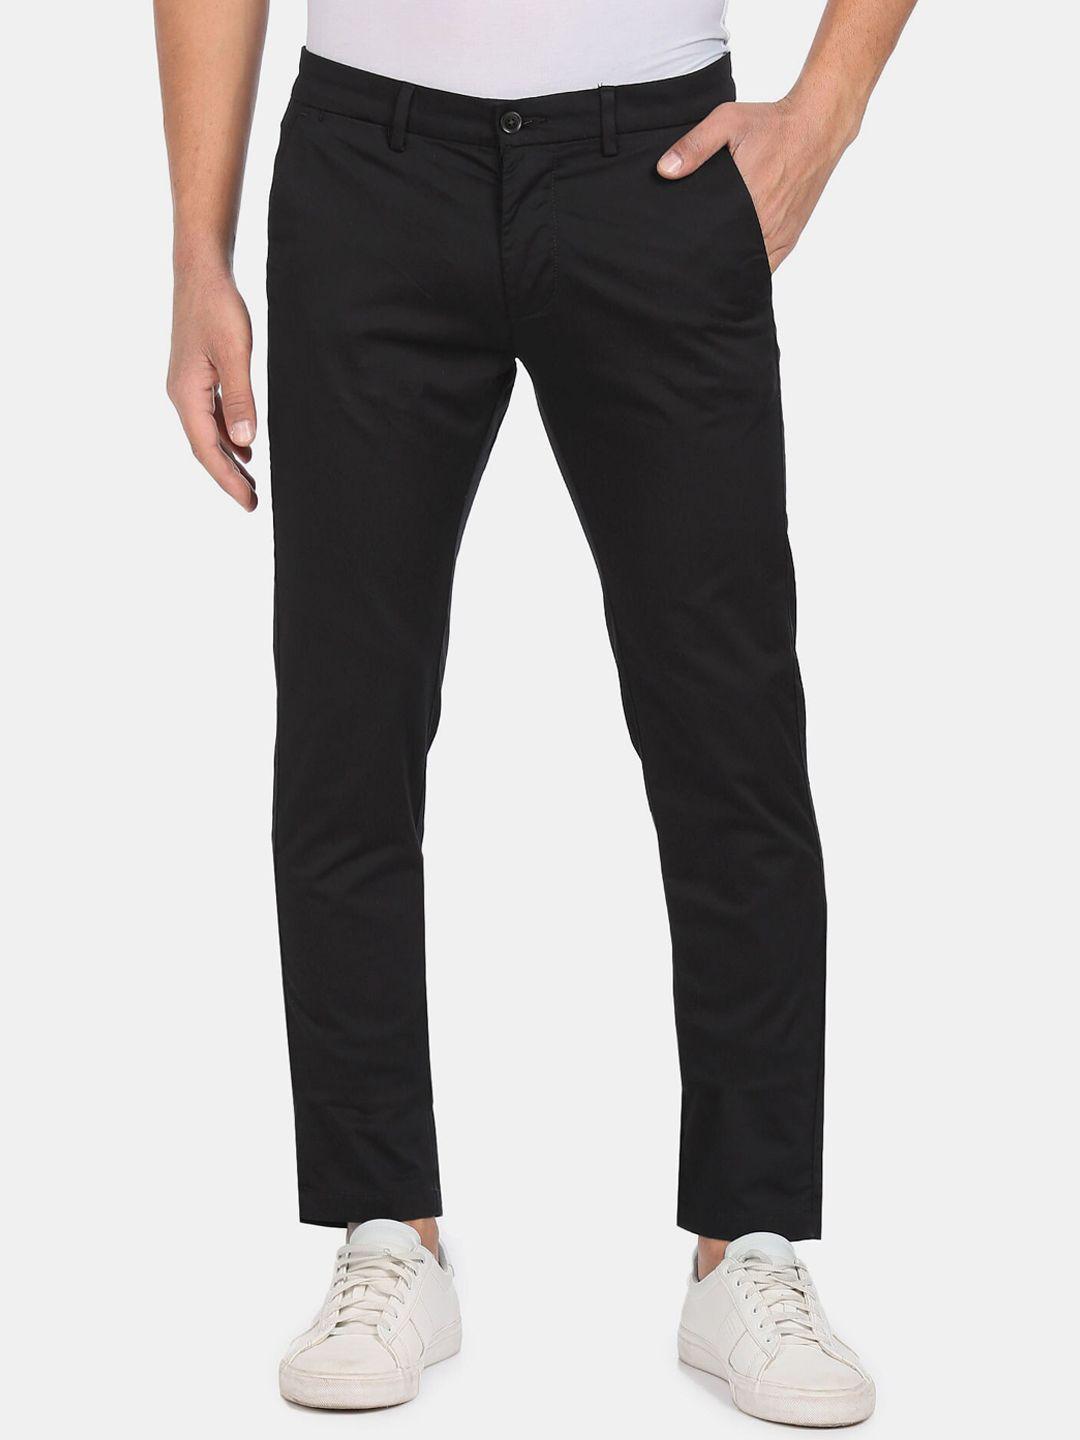 arrow-men-black-mid-rise-solid-flat-front-formal-trousers